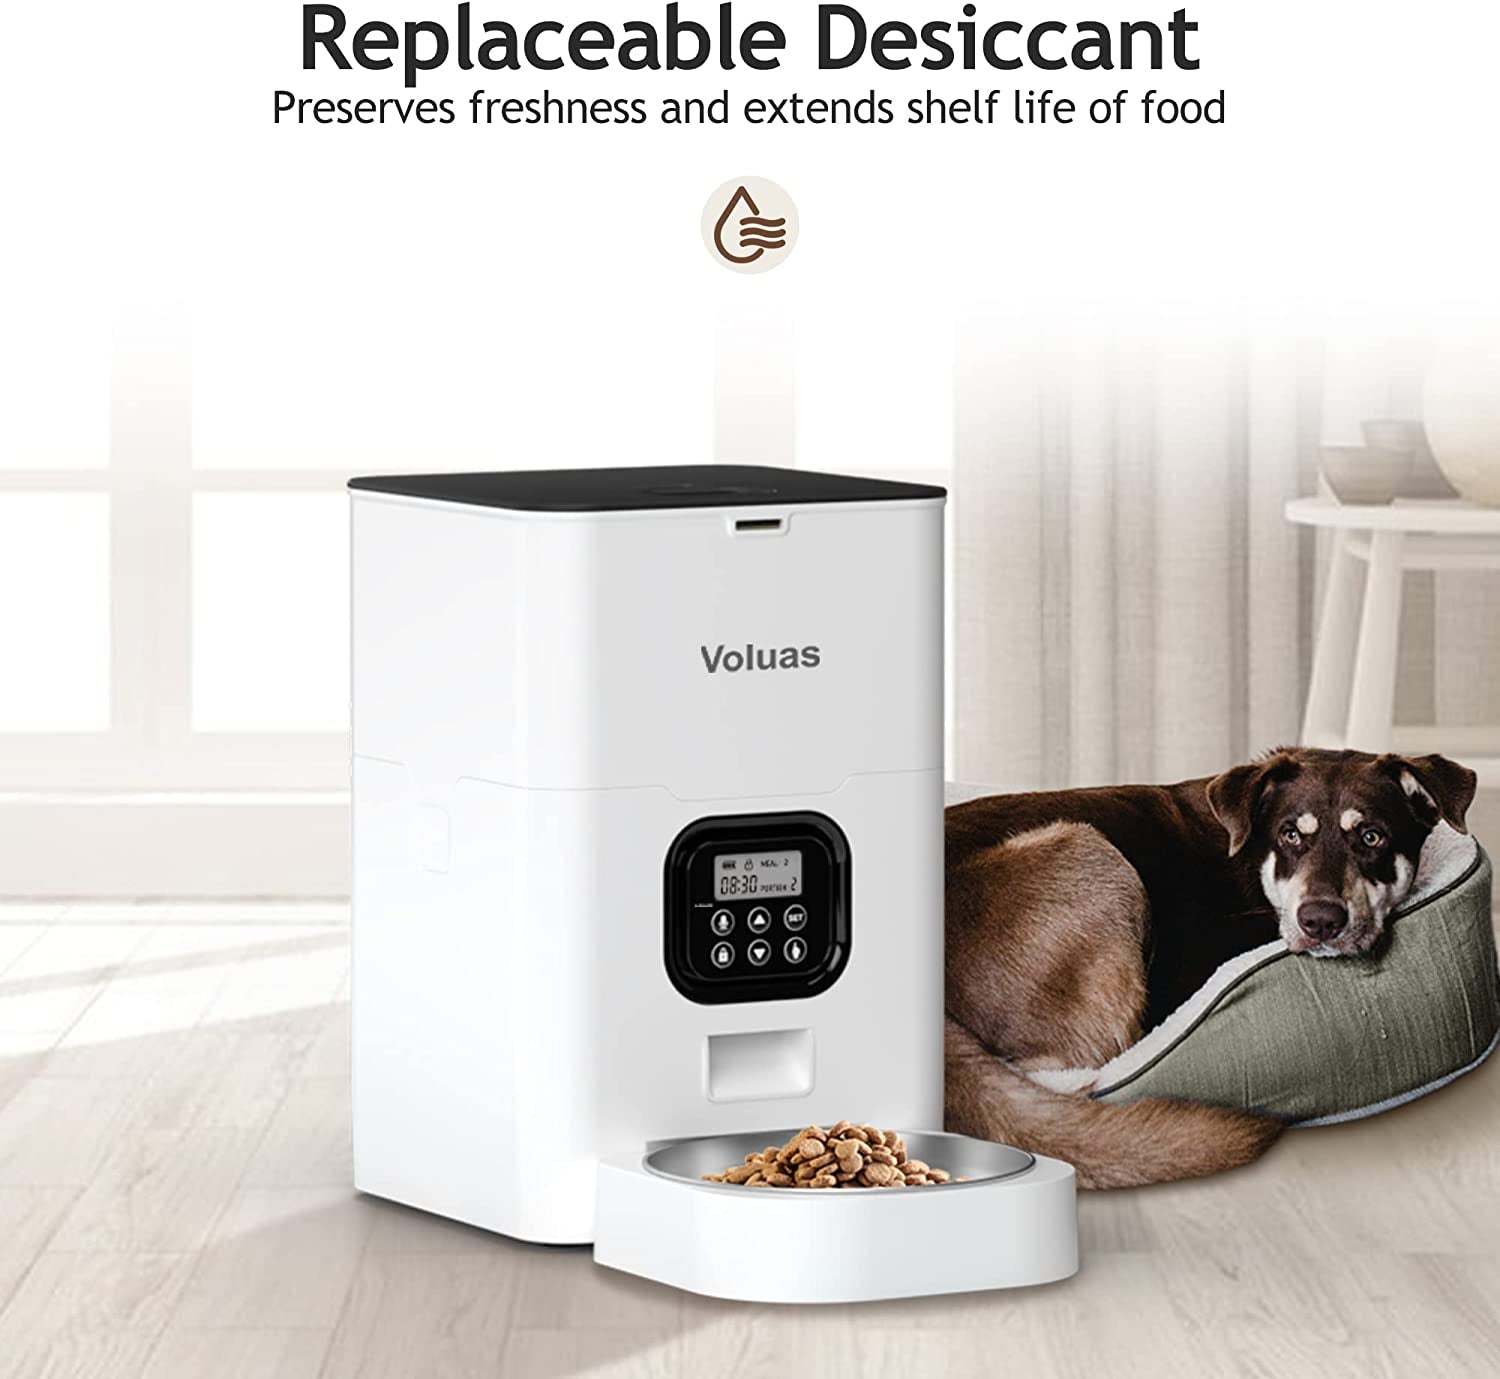 Automatic Pet Feeder with Portion Control for Cats and Dogs - Programmable Timer, Dry Food Dispenser, Desiccant Bag, Voice Recorder